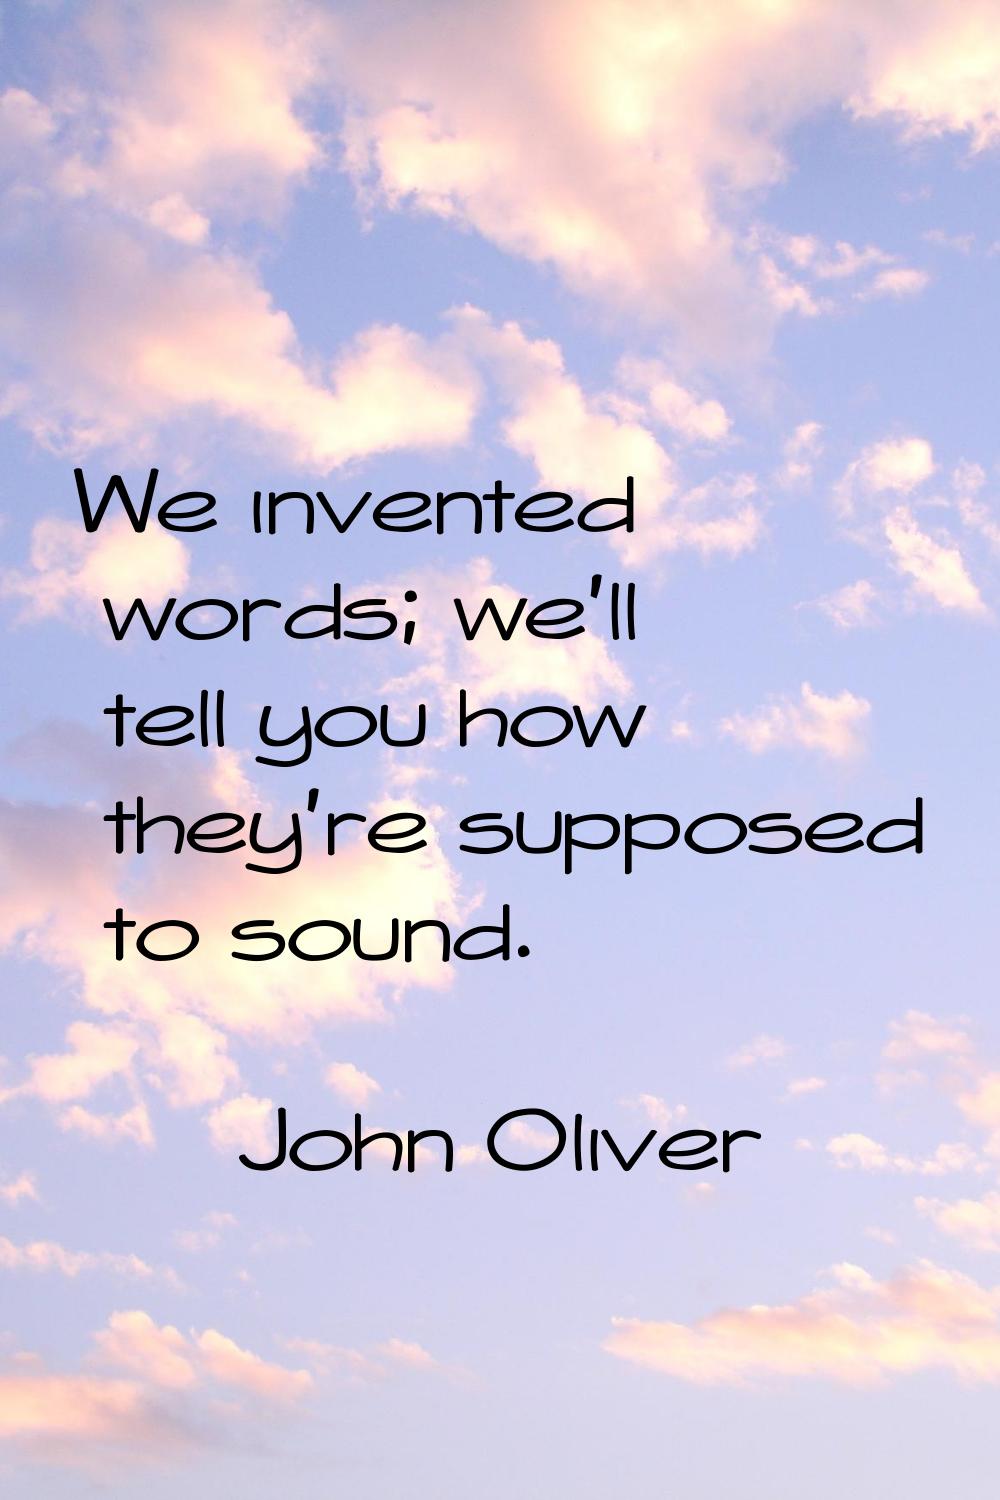 We invented words; we'll tell you how they're supposed to sound.